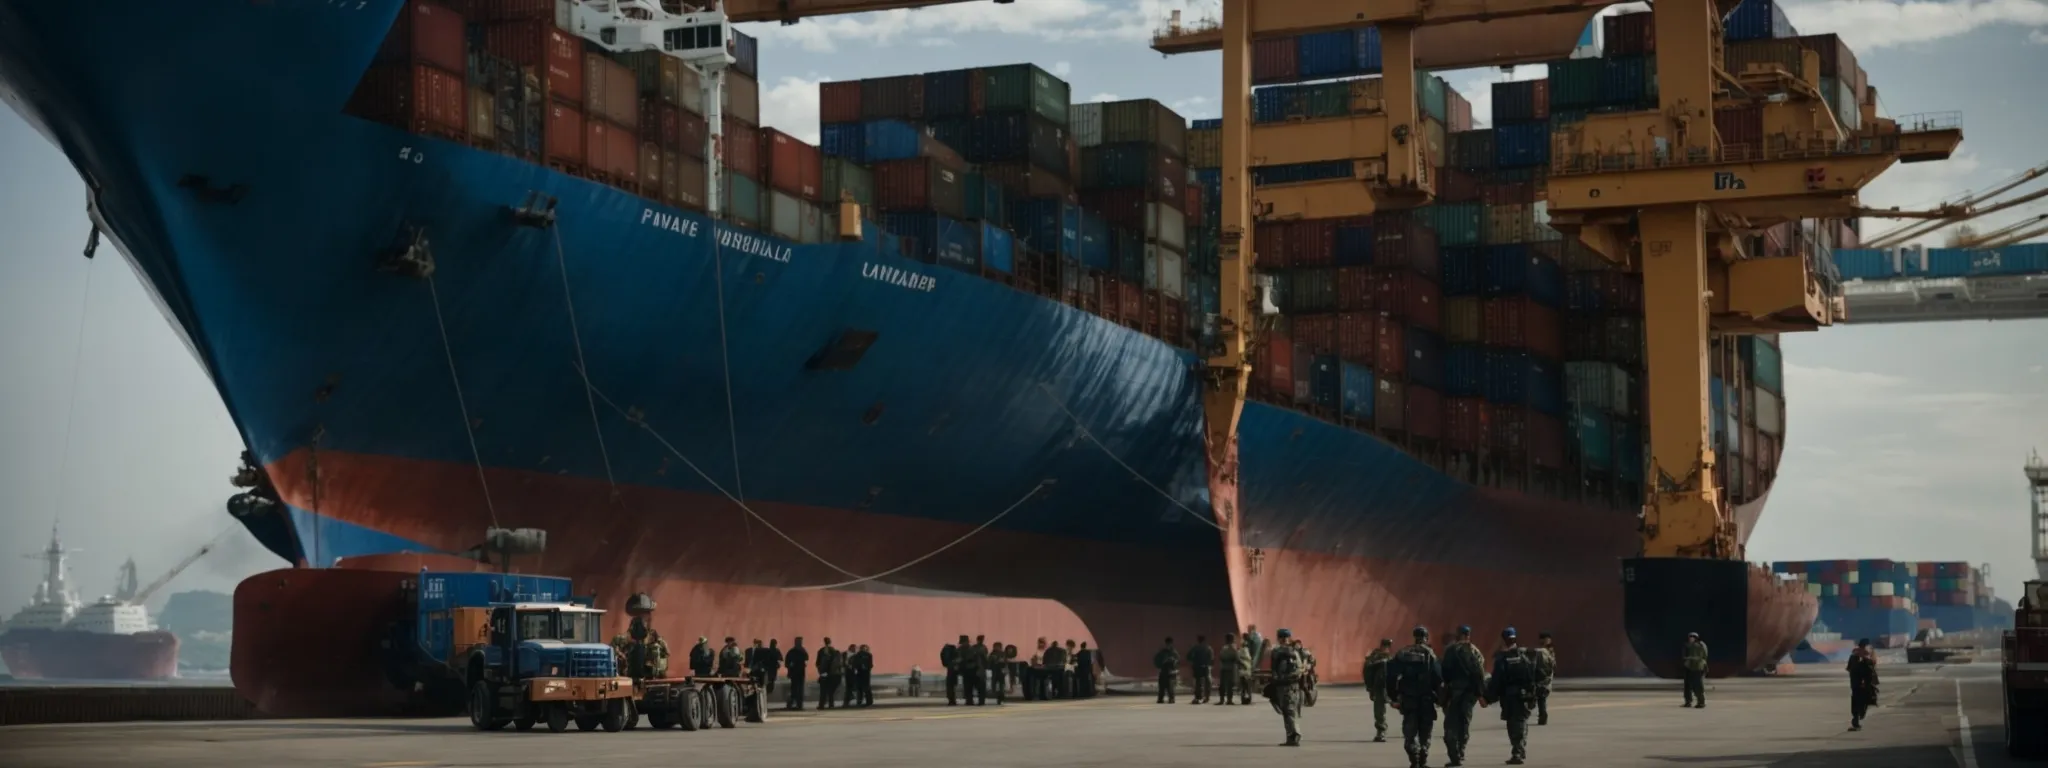 two professionals shaking hands in front of a large cargo ship loaded with containers at a bustling port, symbolizing a concluded agreement.